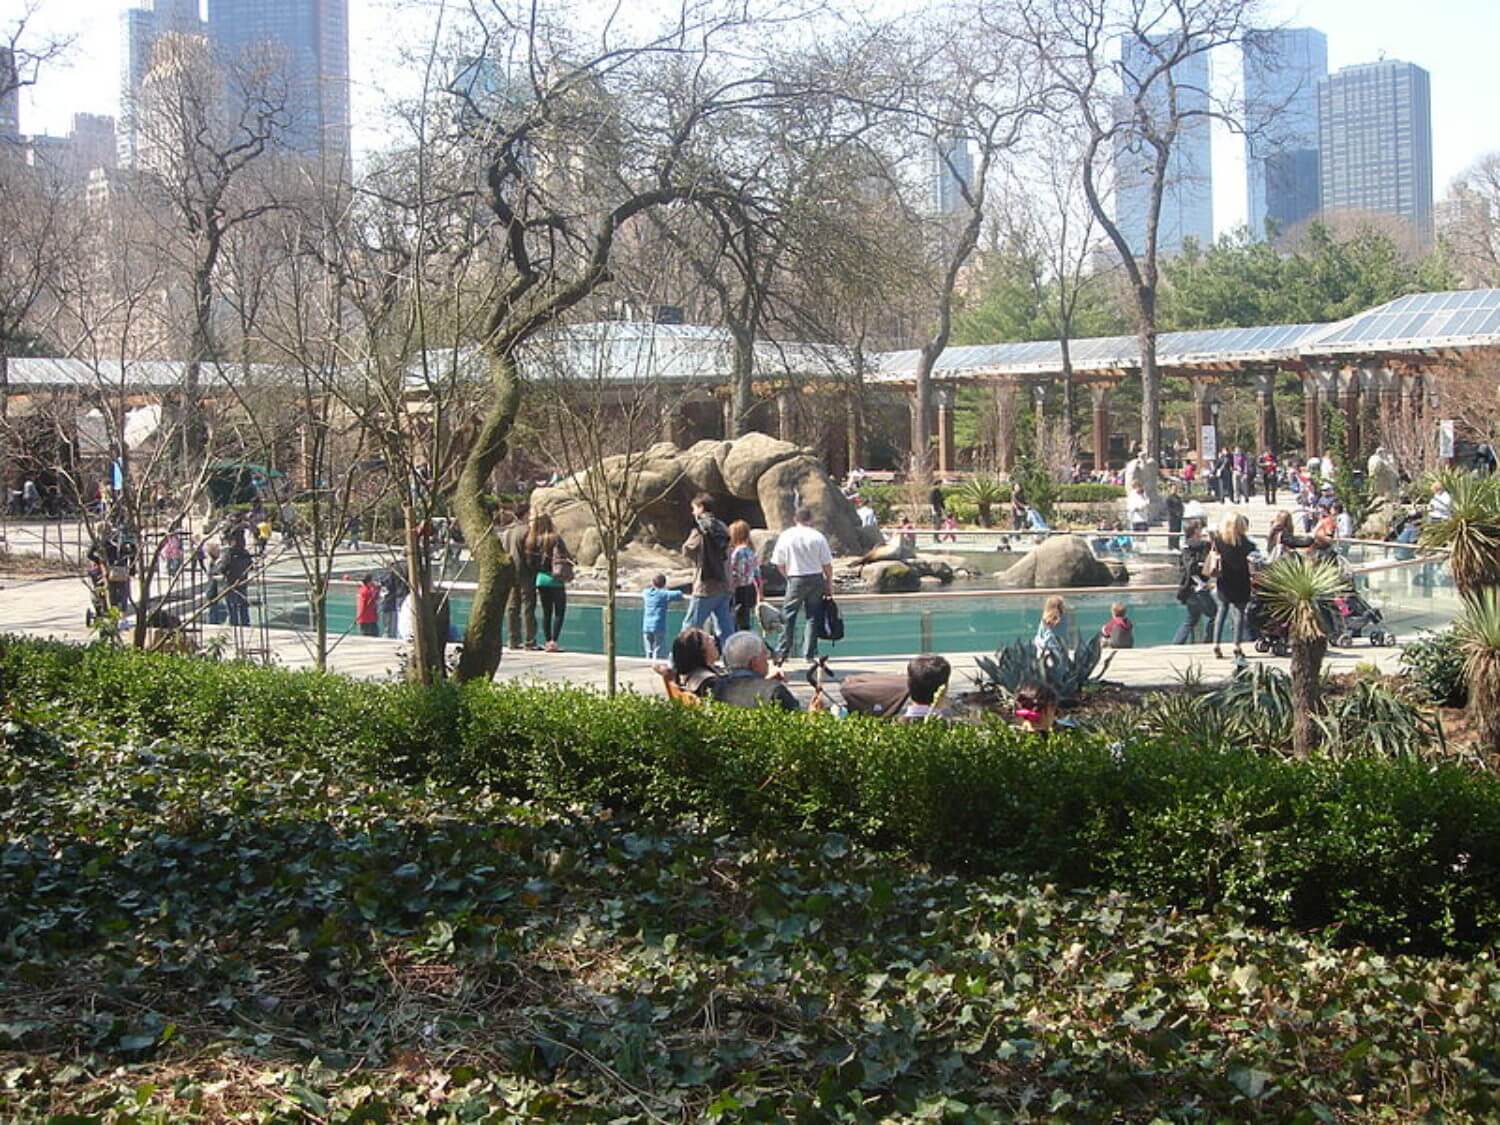 Central Park Zoo - Photo credit: Tim Rodenberg on Wikimedia Commons